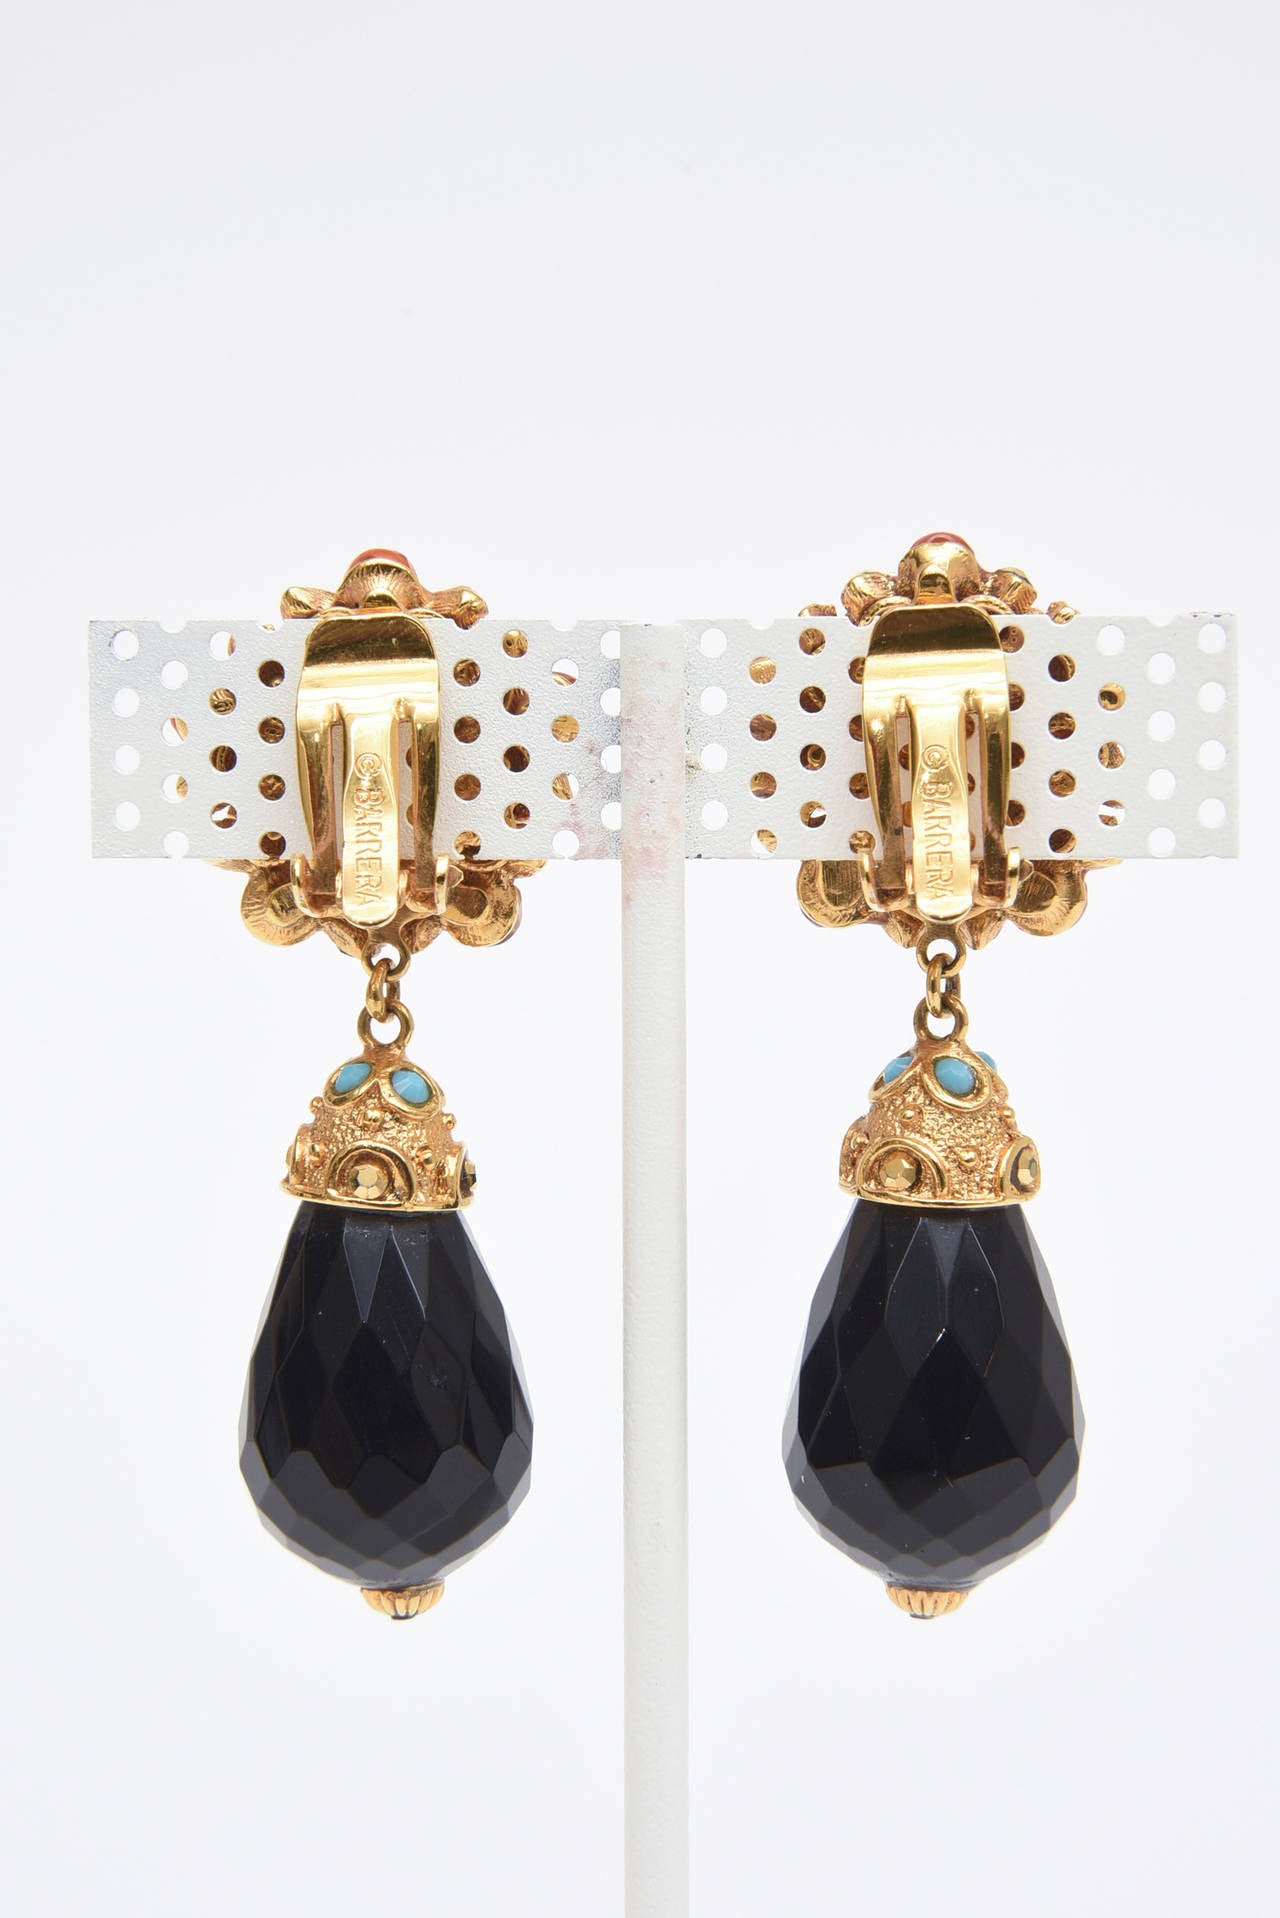 Beautiful black glass meets turquoise and coral glass in these elegant pair of drop clip on earrings. They have an old world meets modern look to them.
Great for day or evening. All the colors play beautifully together.
They are marked Graziano